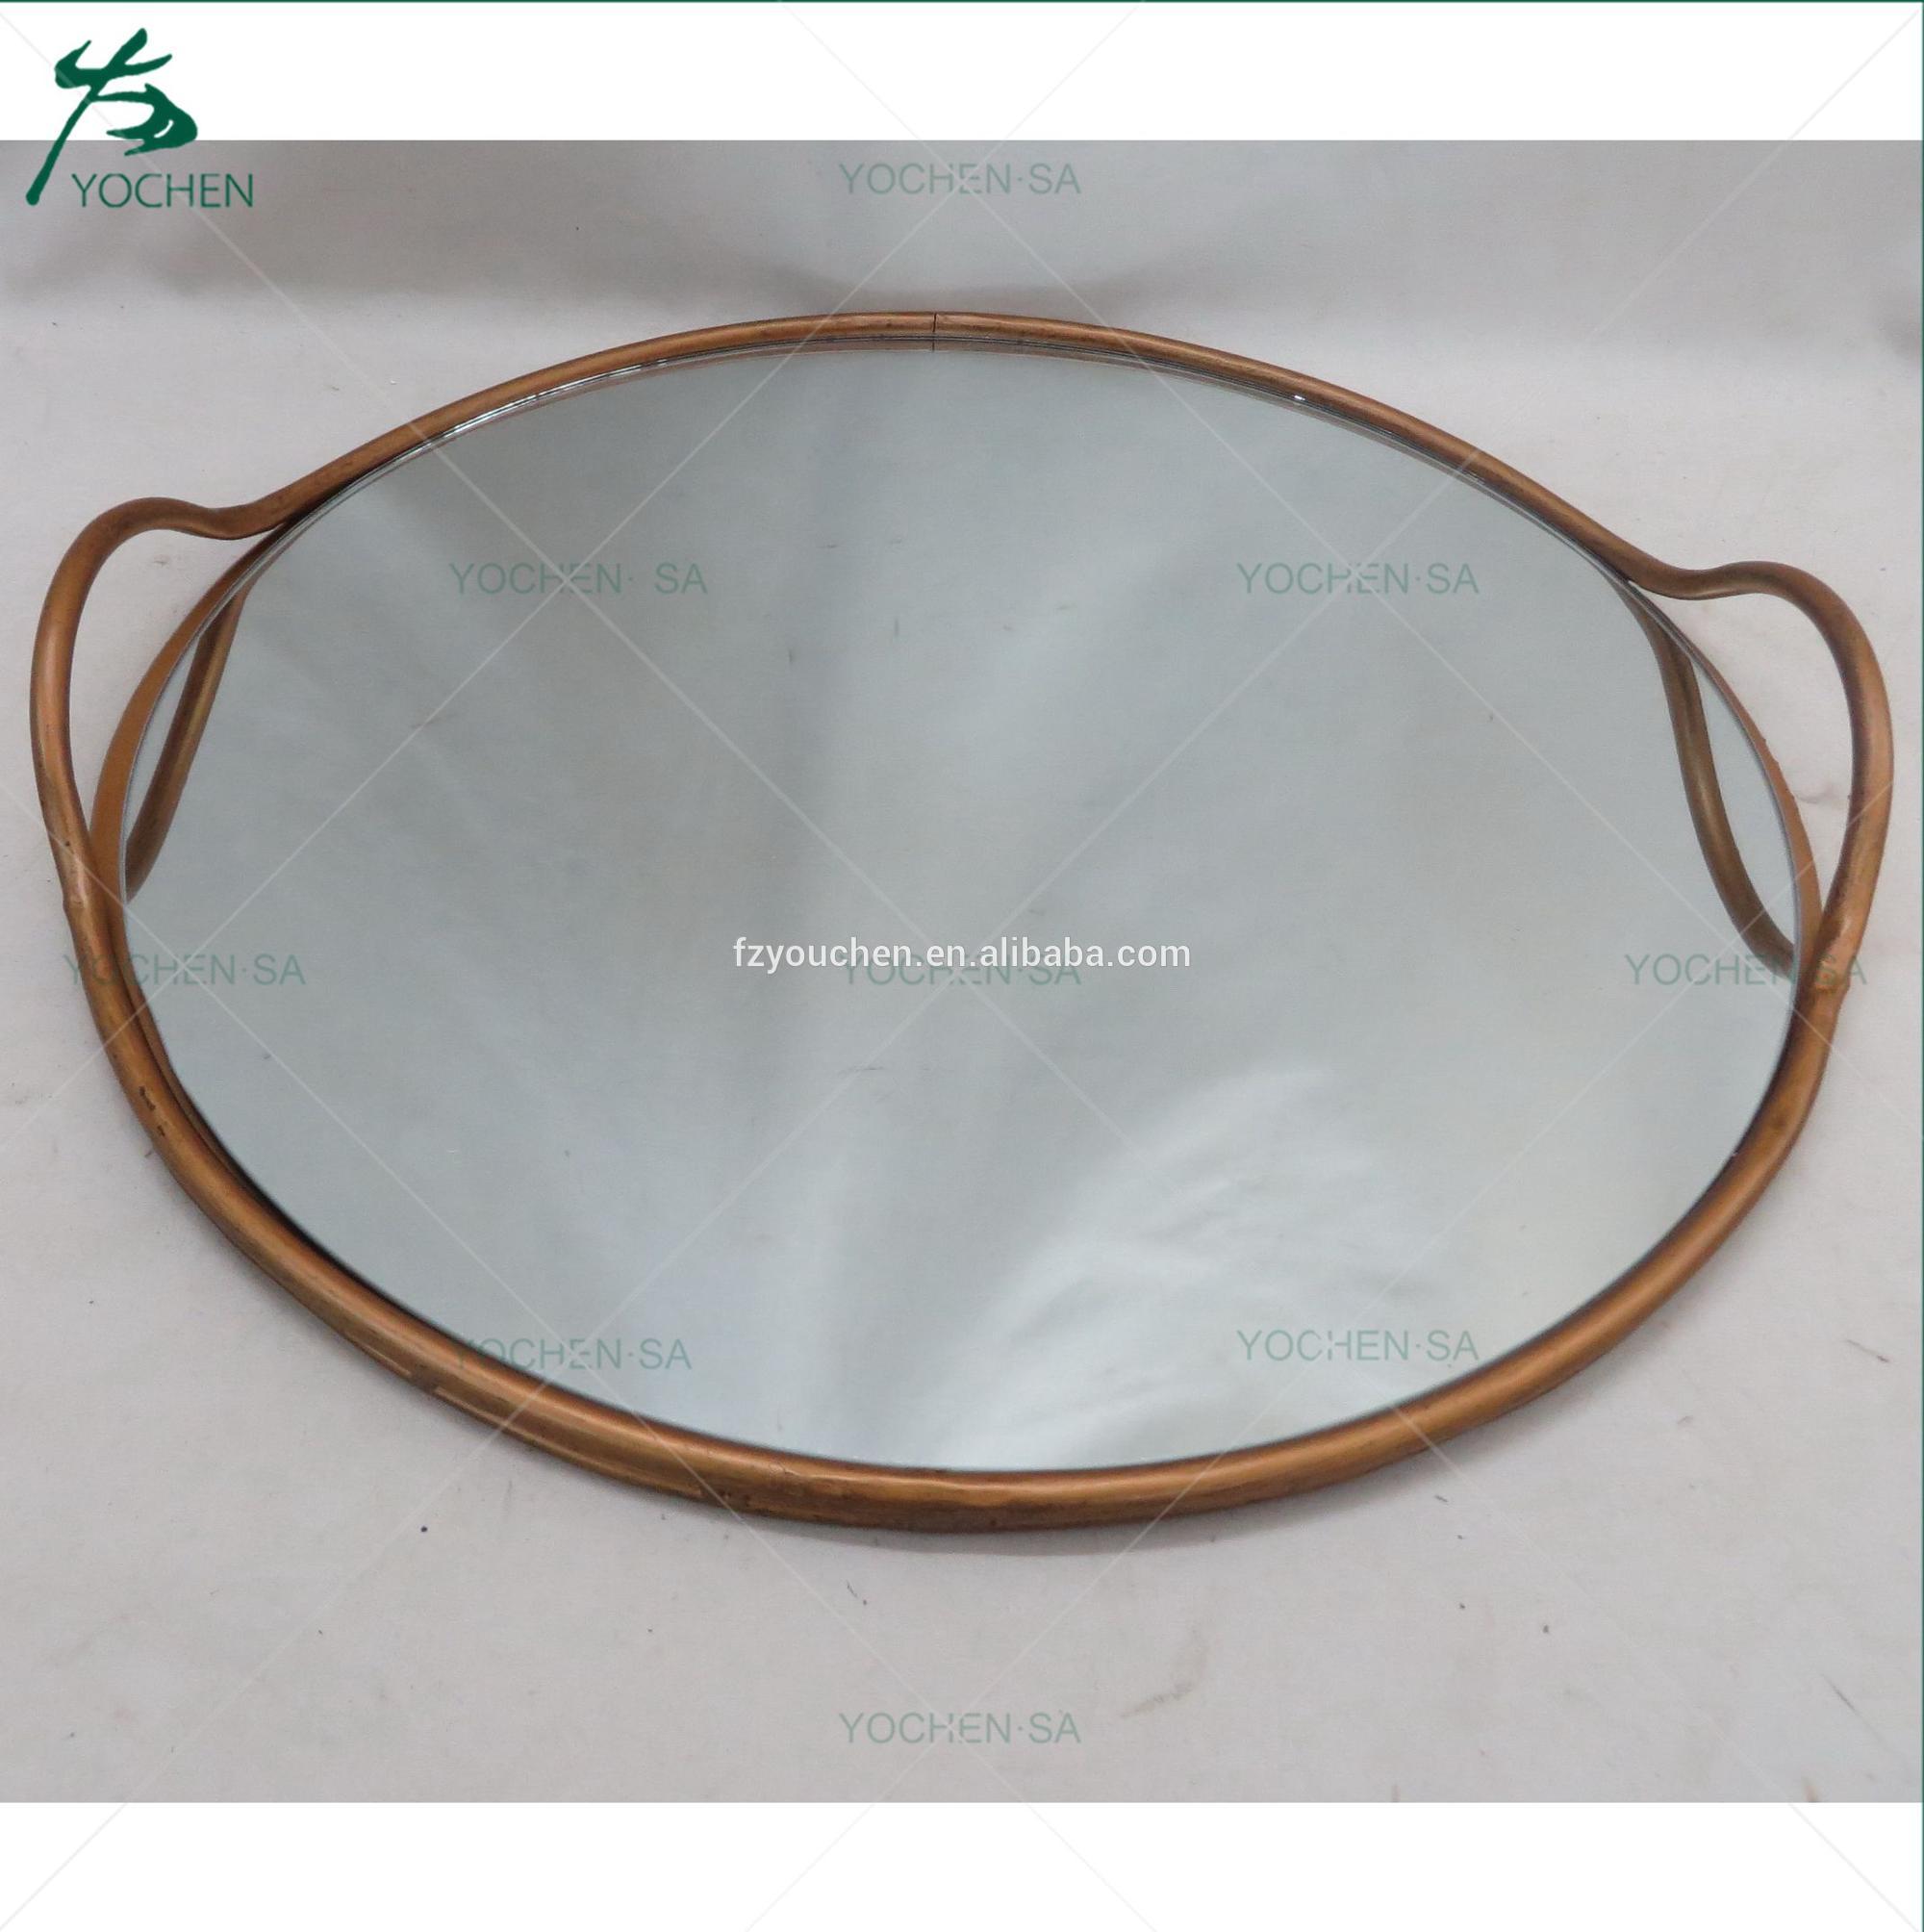 Round Mirror Candle Plate Tray Wedding Decors